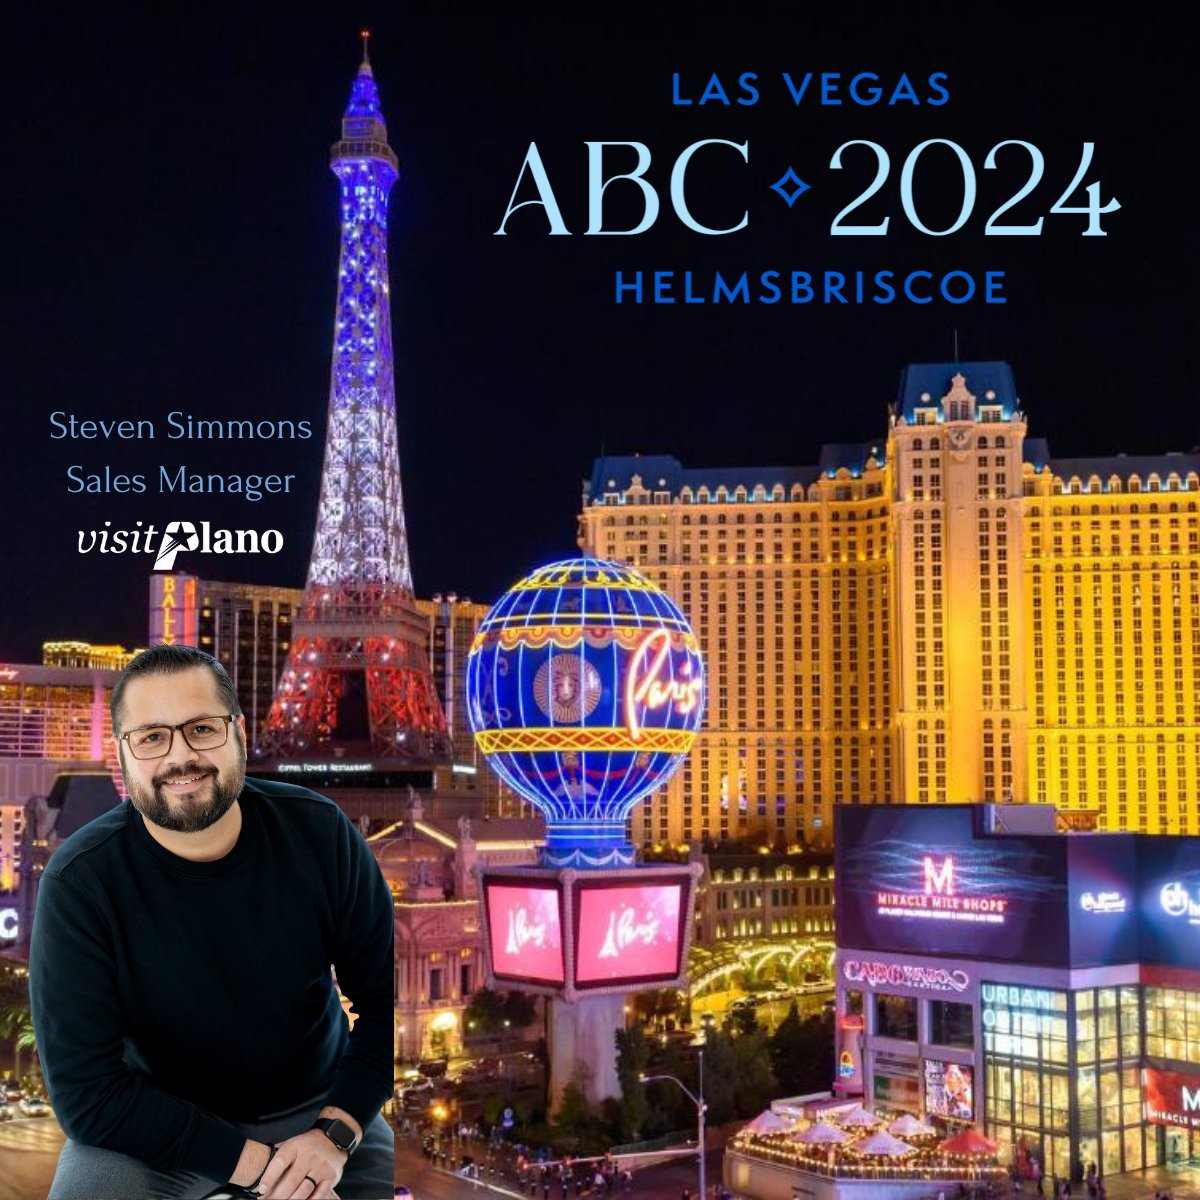 Steven Simmons is in Las Vegas to participate in the @HelmsBriscoe Annual Business Conference. This is a fantastic opportunity for Visit Plano to connect with meeting industry leaders.
#HBABC #meetingsindustry #eventprofs